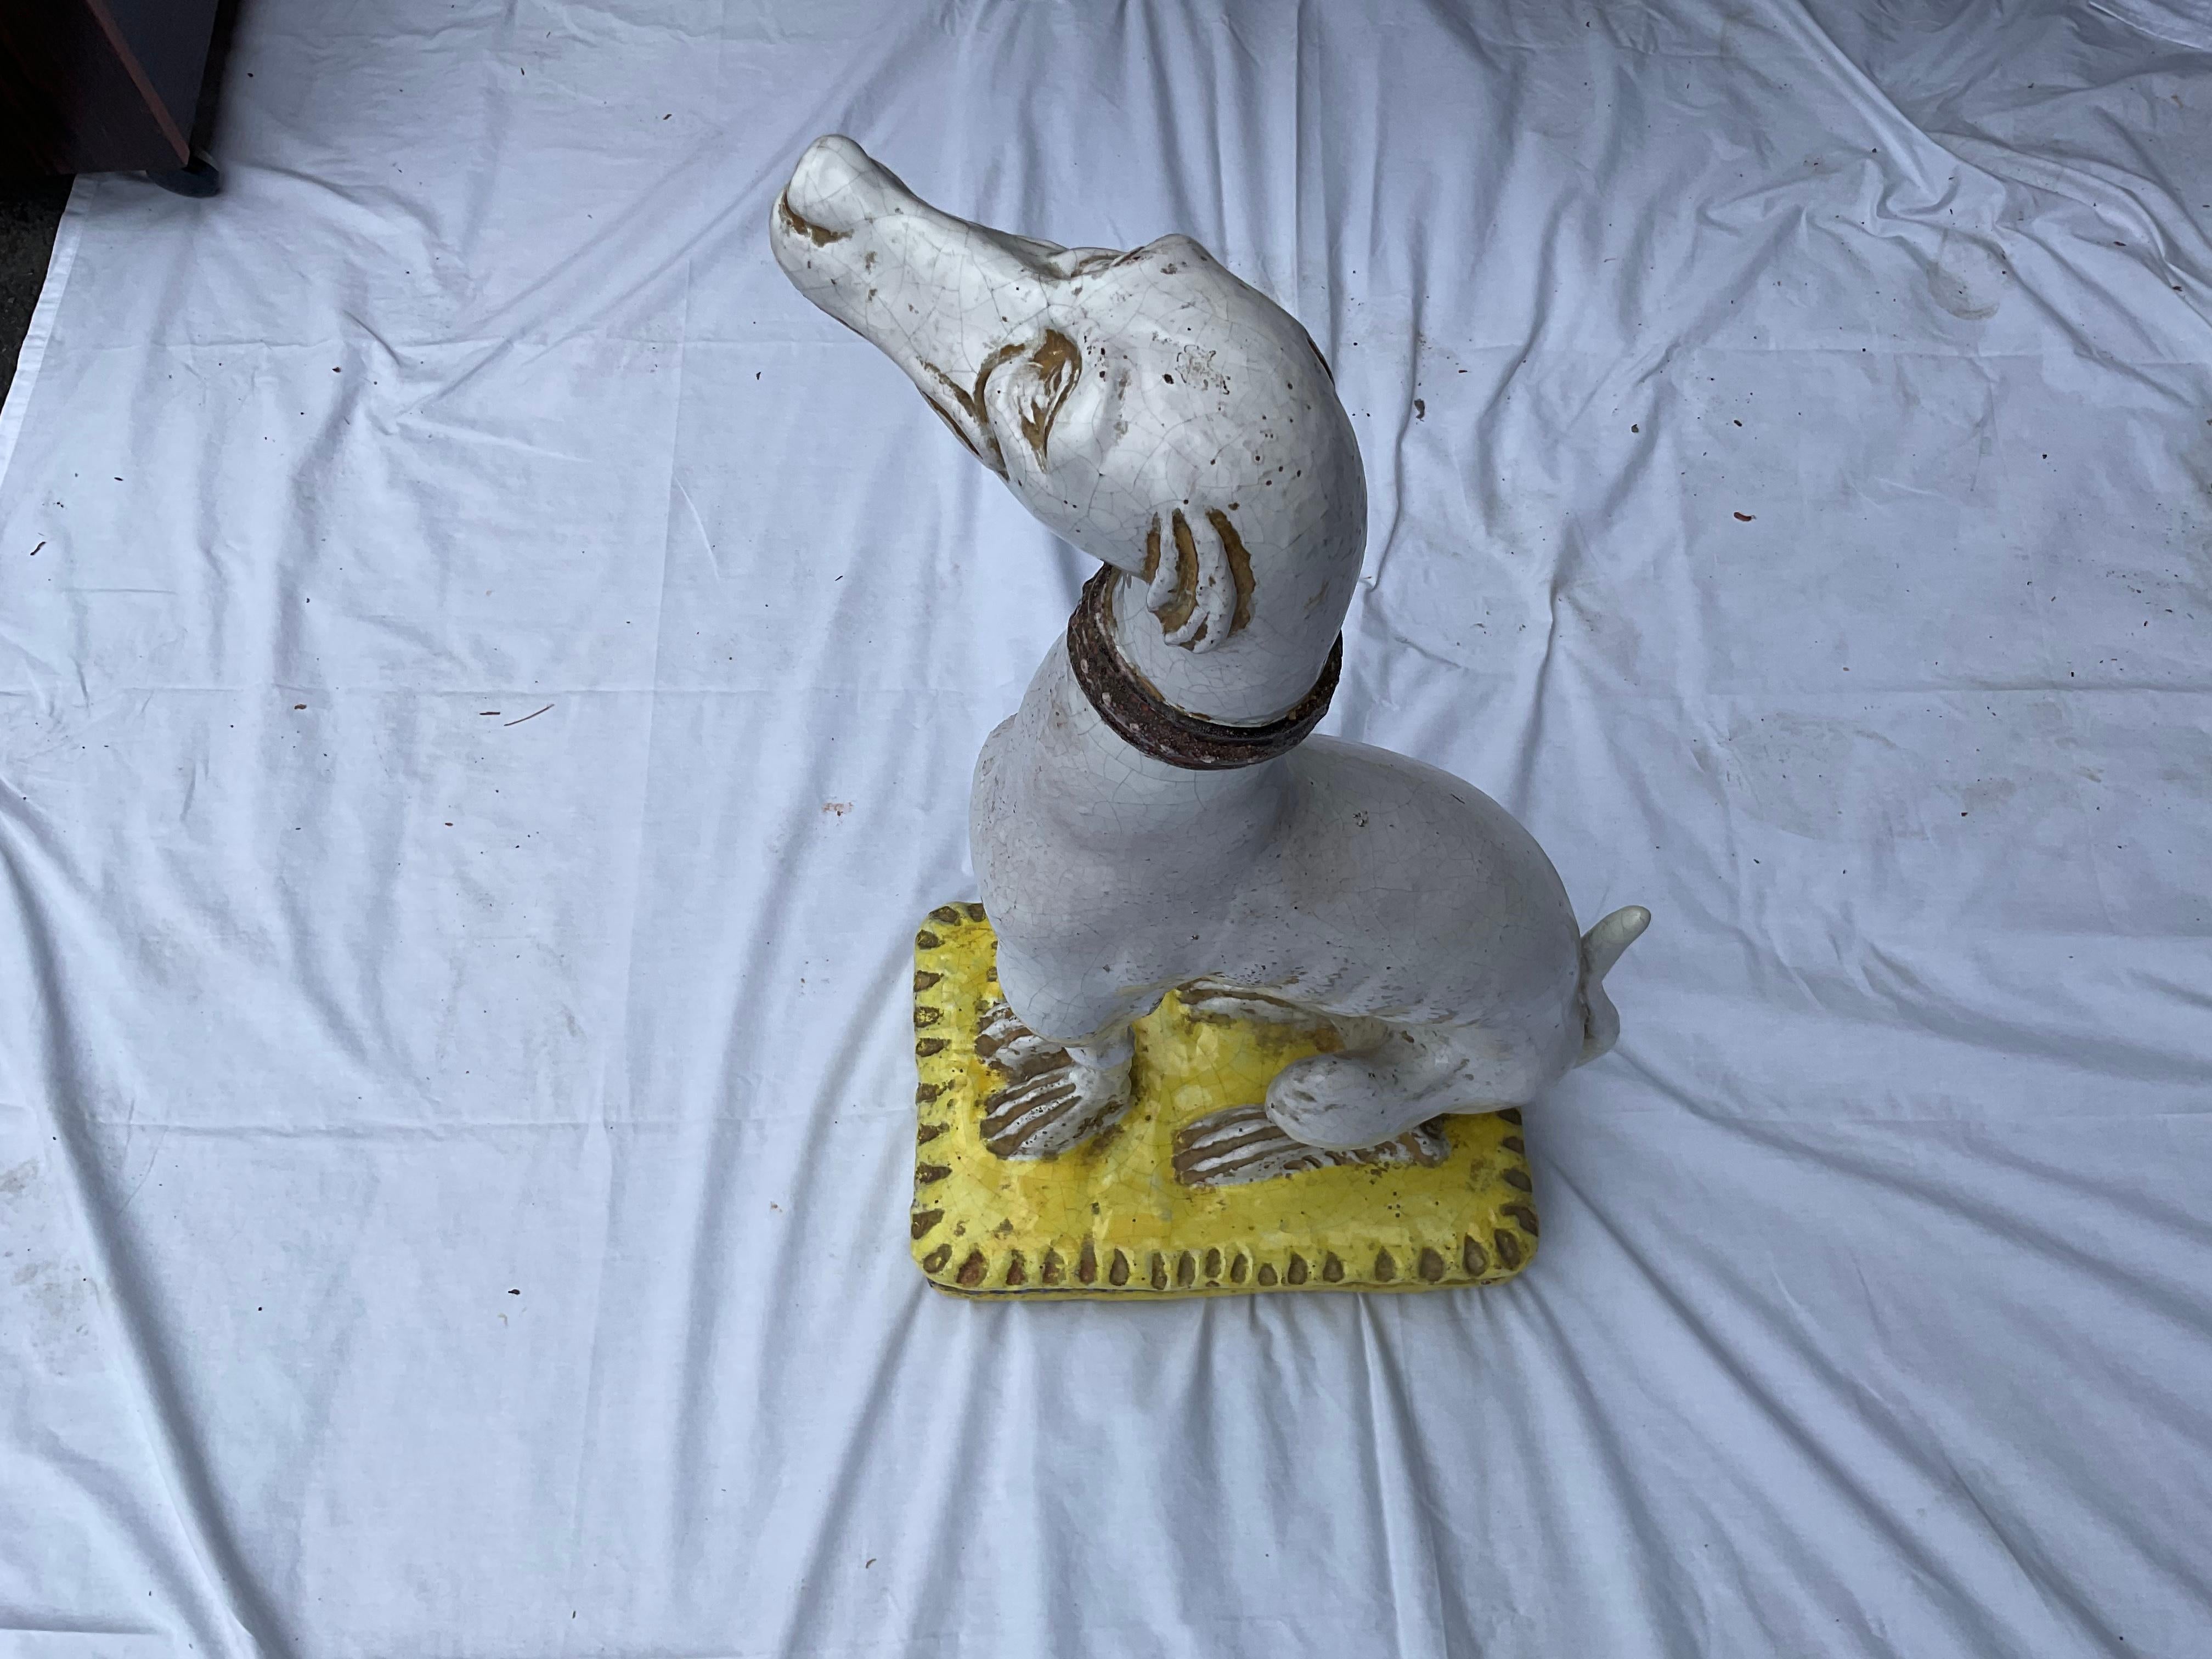 Unusual, and charming, seated Italian whippet. Hand painted, and sitting on a yellow pillow w/ rope design. This design of a whippet, is a little harder to find, than some others. Very obedient, waiting for its owner to claim it!